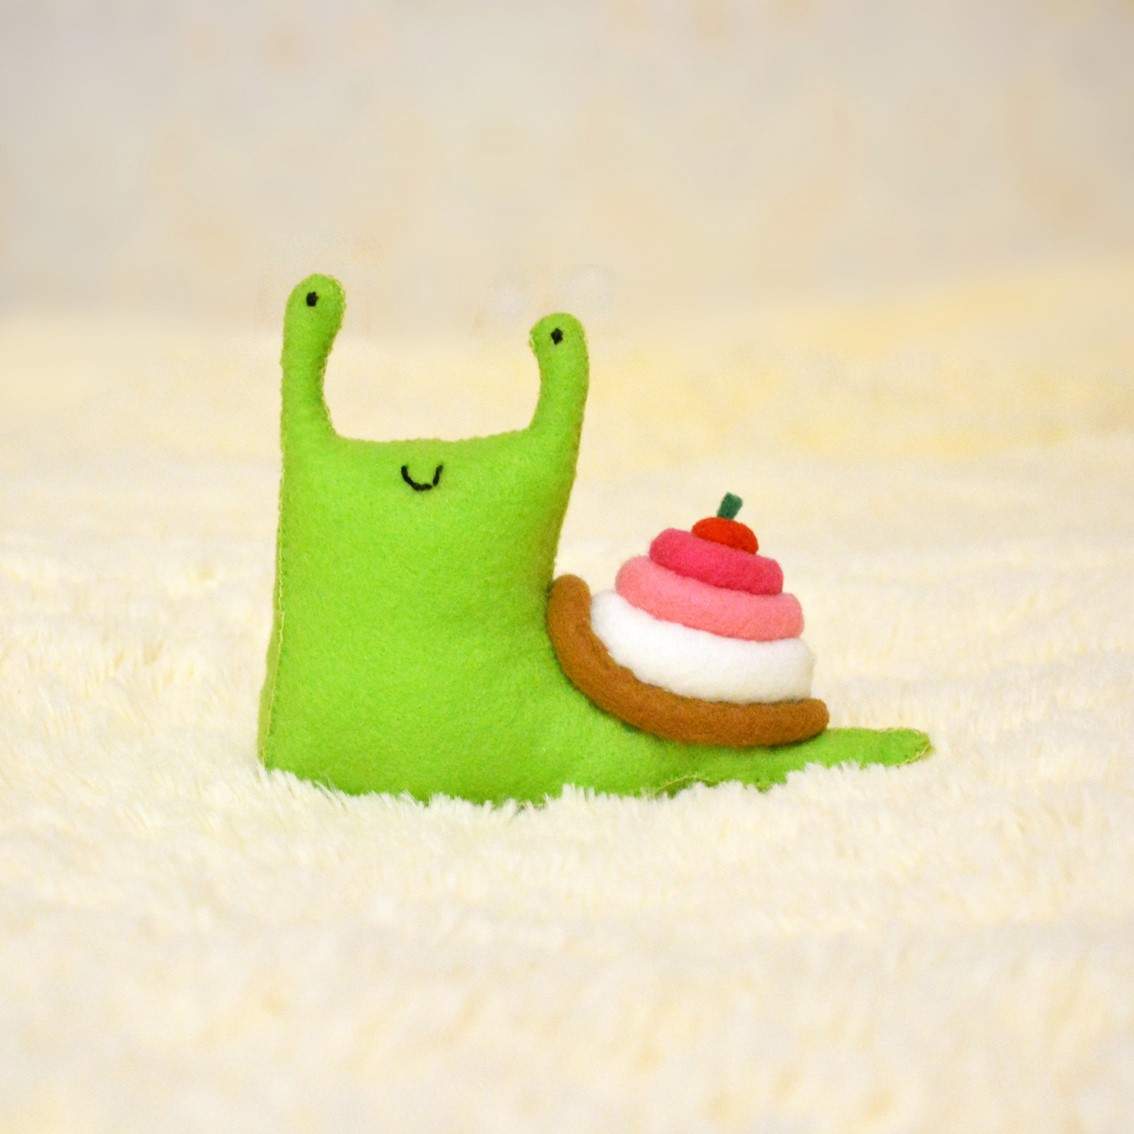 Make your mom, grandmother or little ones a cute felt garden snail with this easy-to-follow PDF pattern & tutorial! Perfect as a gift or a great way to spend a spring or summer afternoon, this craft is sure to bring a smile to the recipient's face. Get creative and make a snail of your own - it's a great way to bring color to your home!